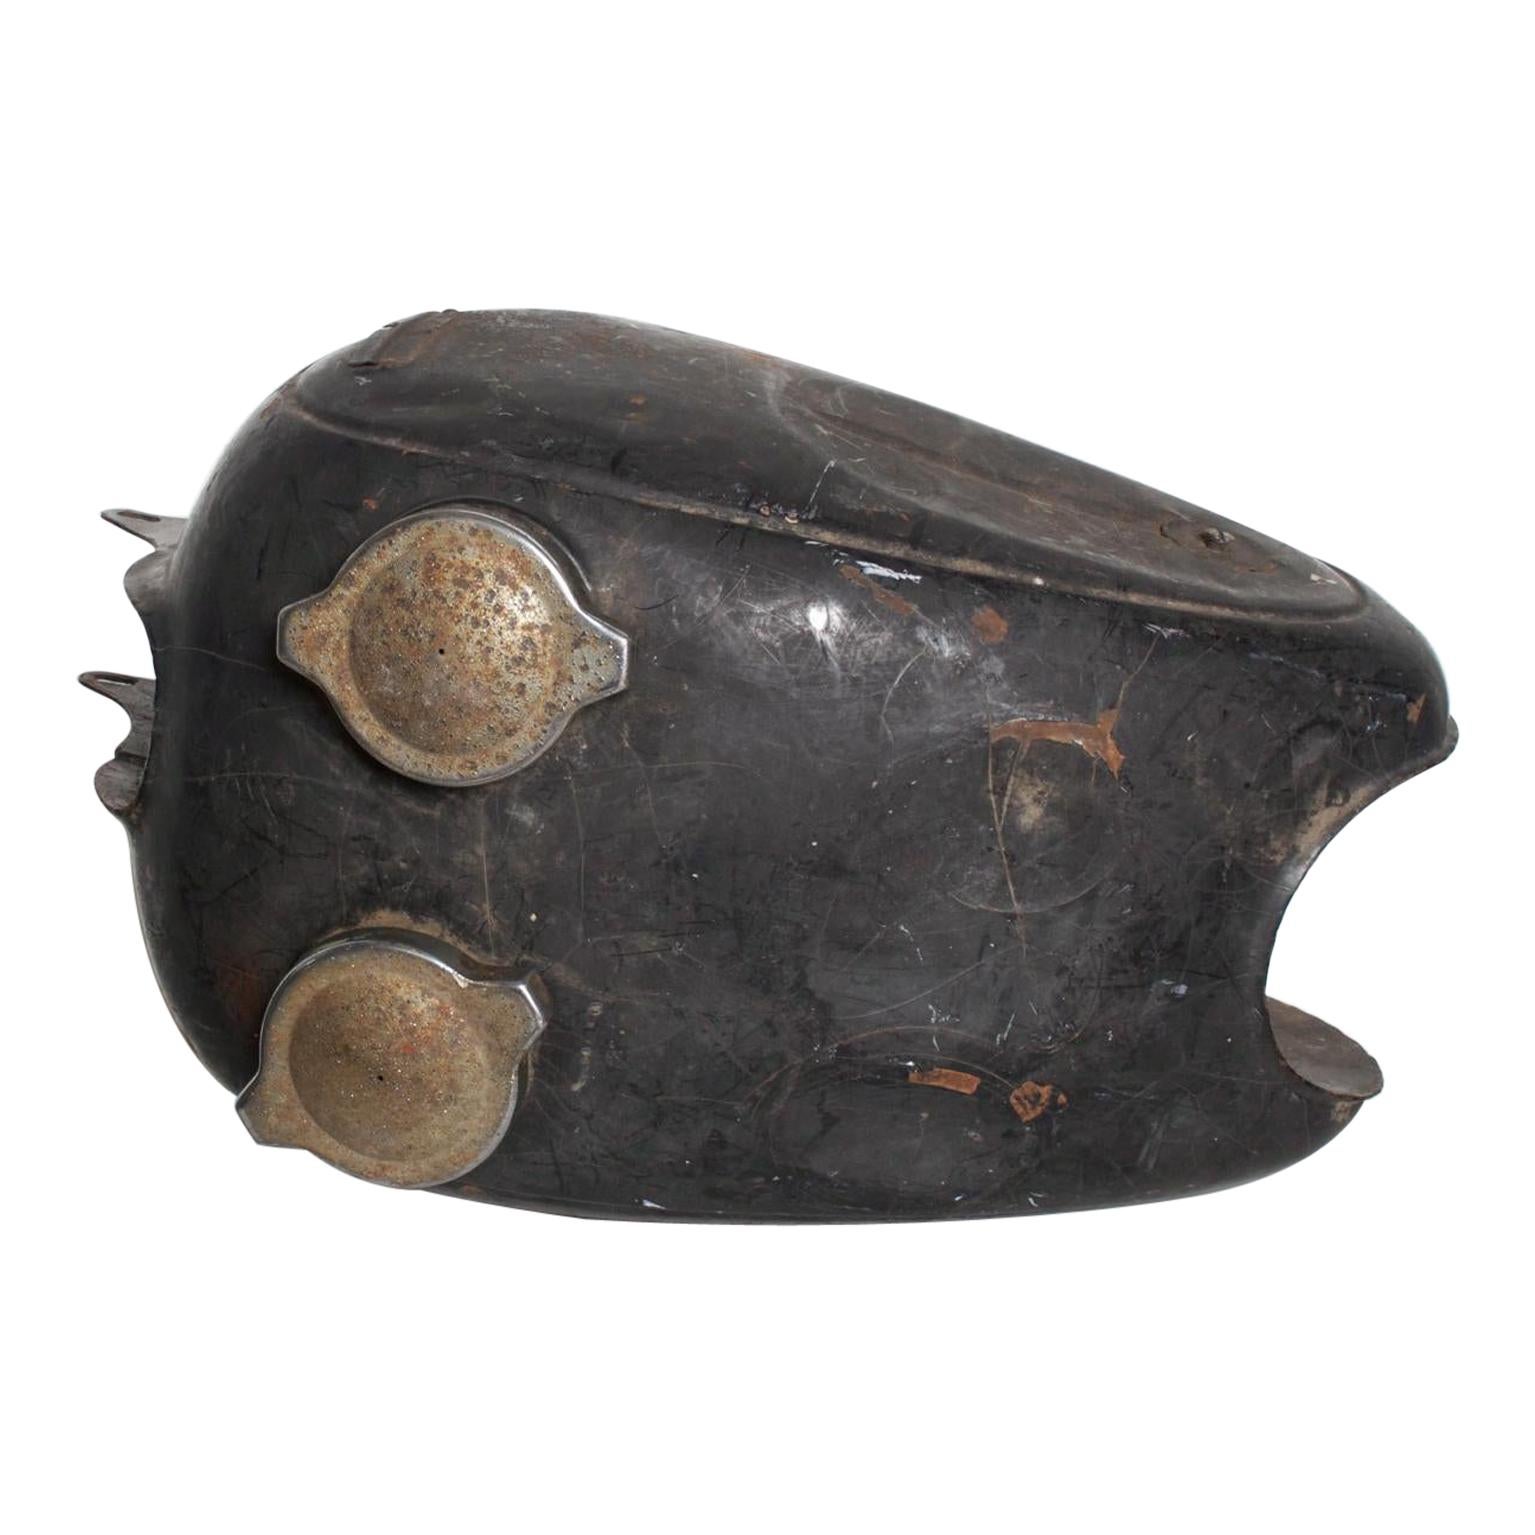 Gas Tank
Distressed Vintage Mod Motorcycle Gas Tank Black Metal Made in the USA 1960s
Has seen a lot of use and wear--weathered and worn living
Unmarked.
Fun for man cave. Great display piece. Mod appeal.
Original Unrestored Distressed